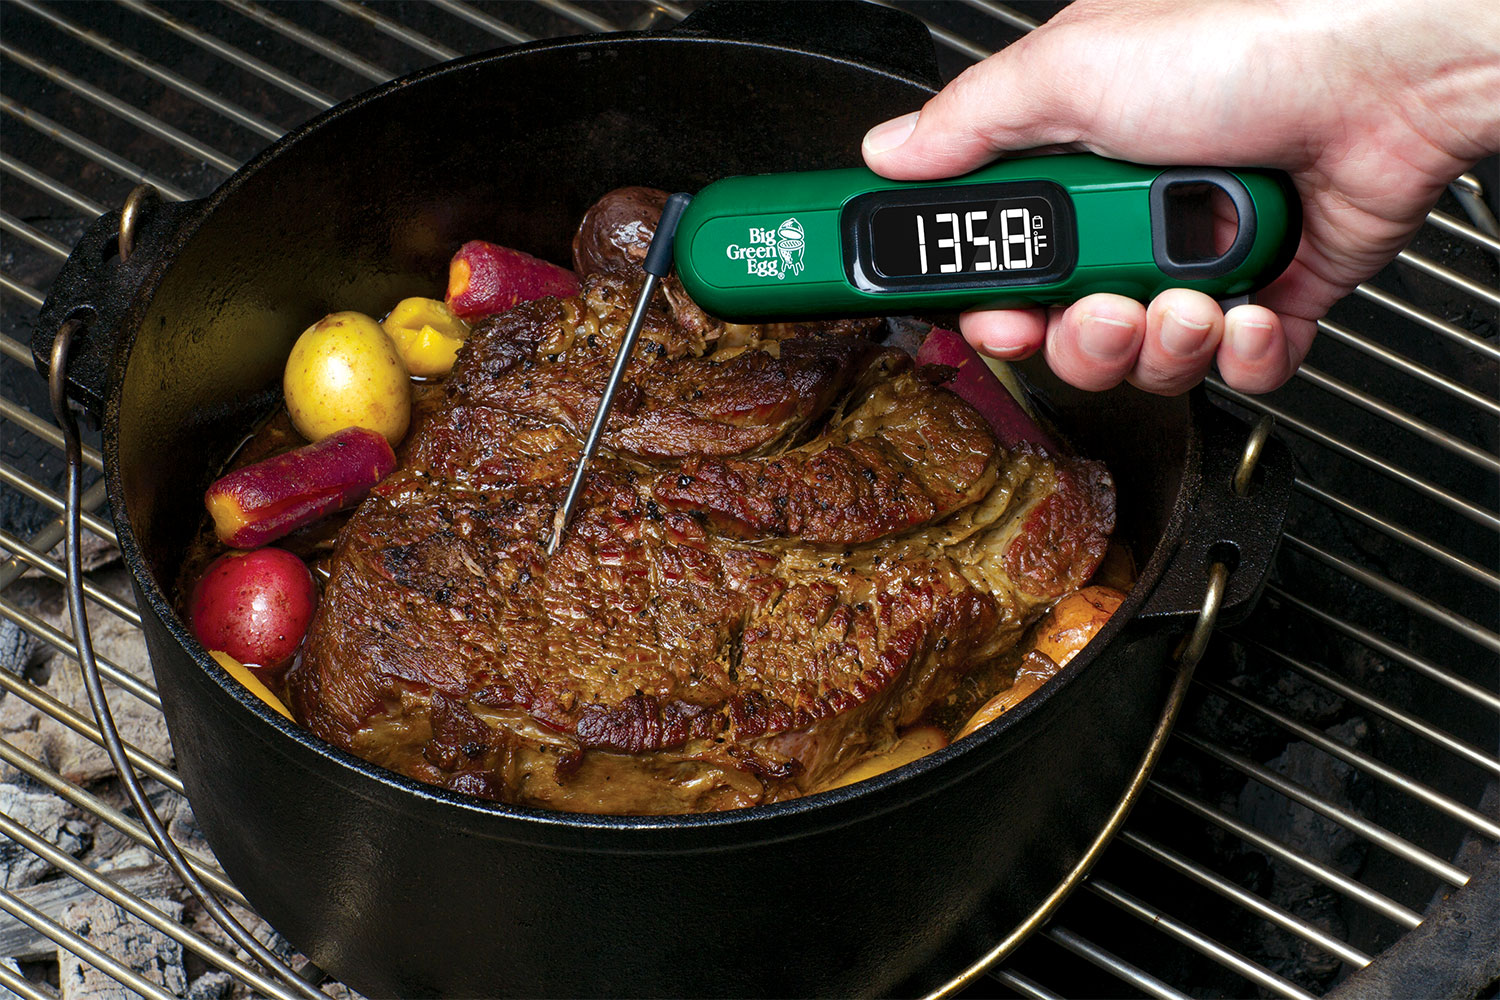 https://k5y6i9u3.rocketcdn.me/wp-content/uploads/2021/11/Big_Green_Egg_Instant_Read_Digital_Food_Thermometer_04_Thermometer_in_Roast.jpg